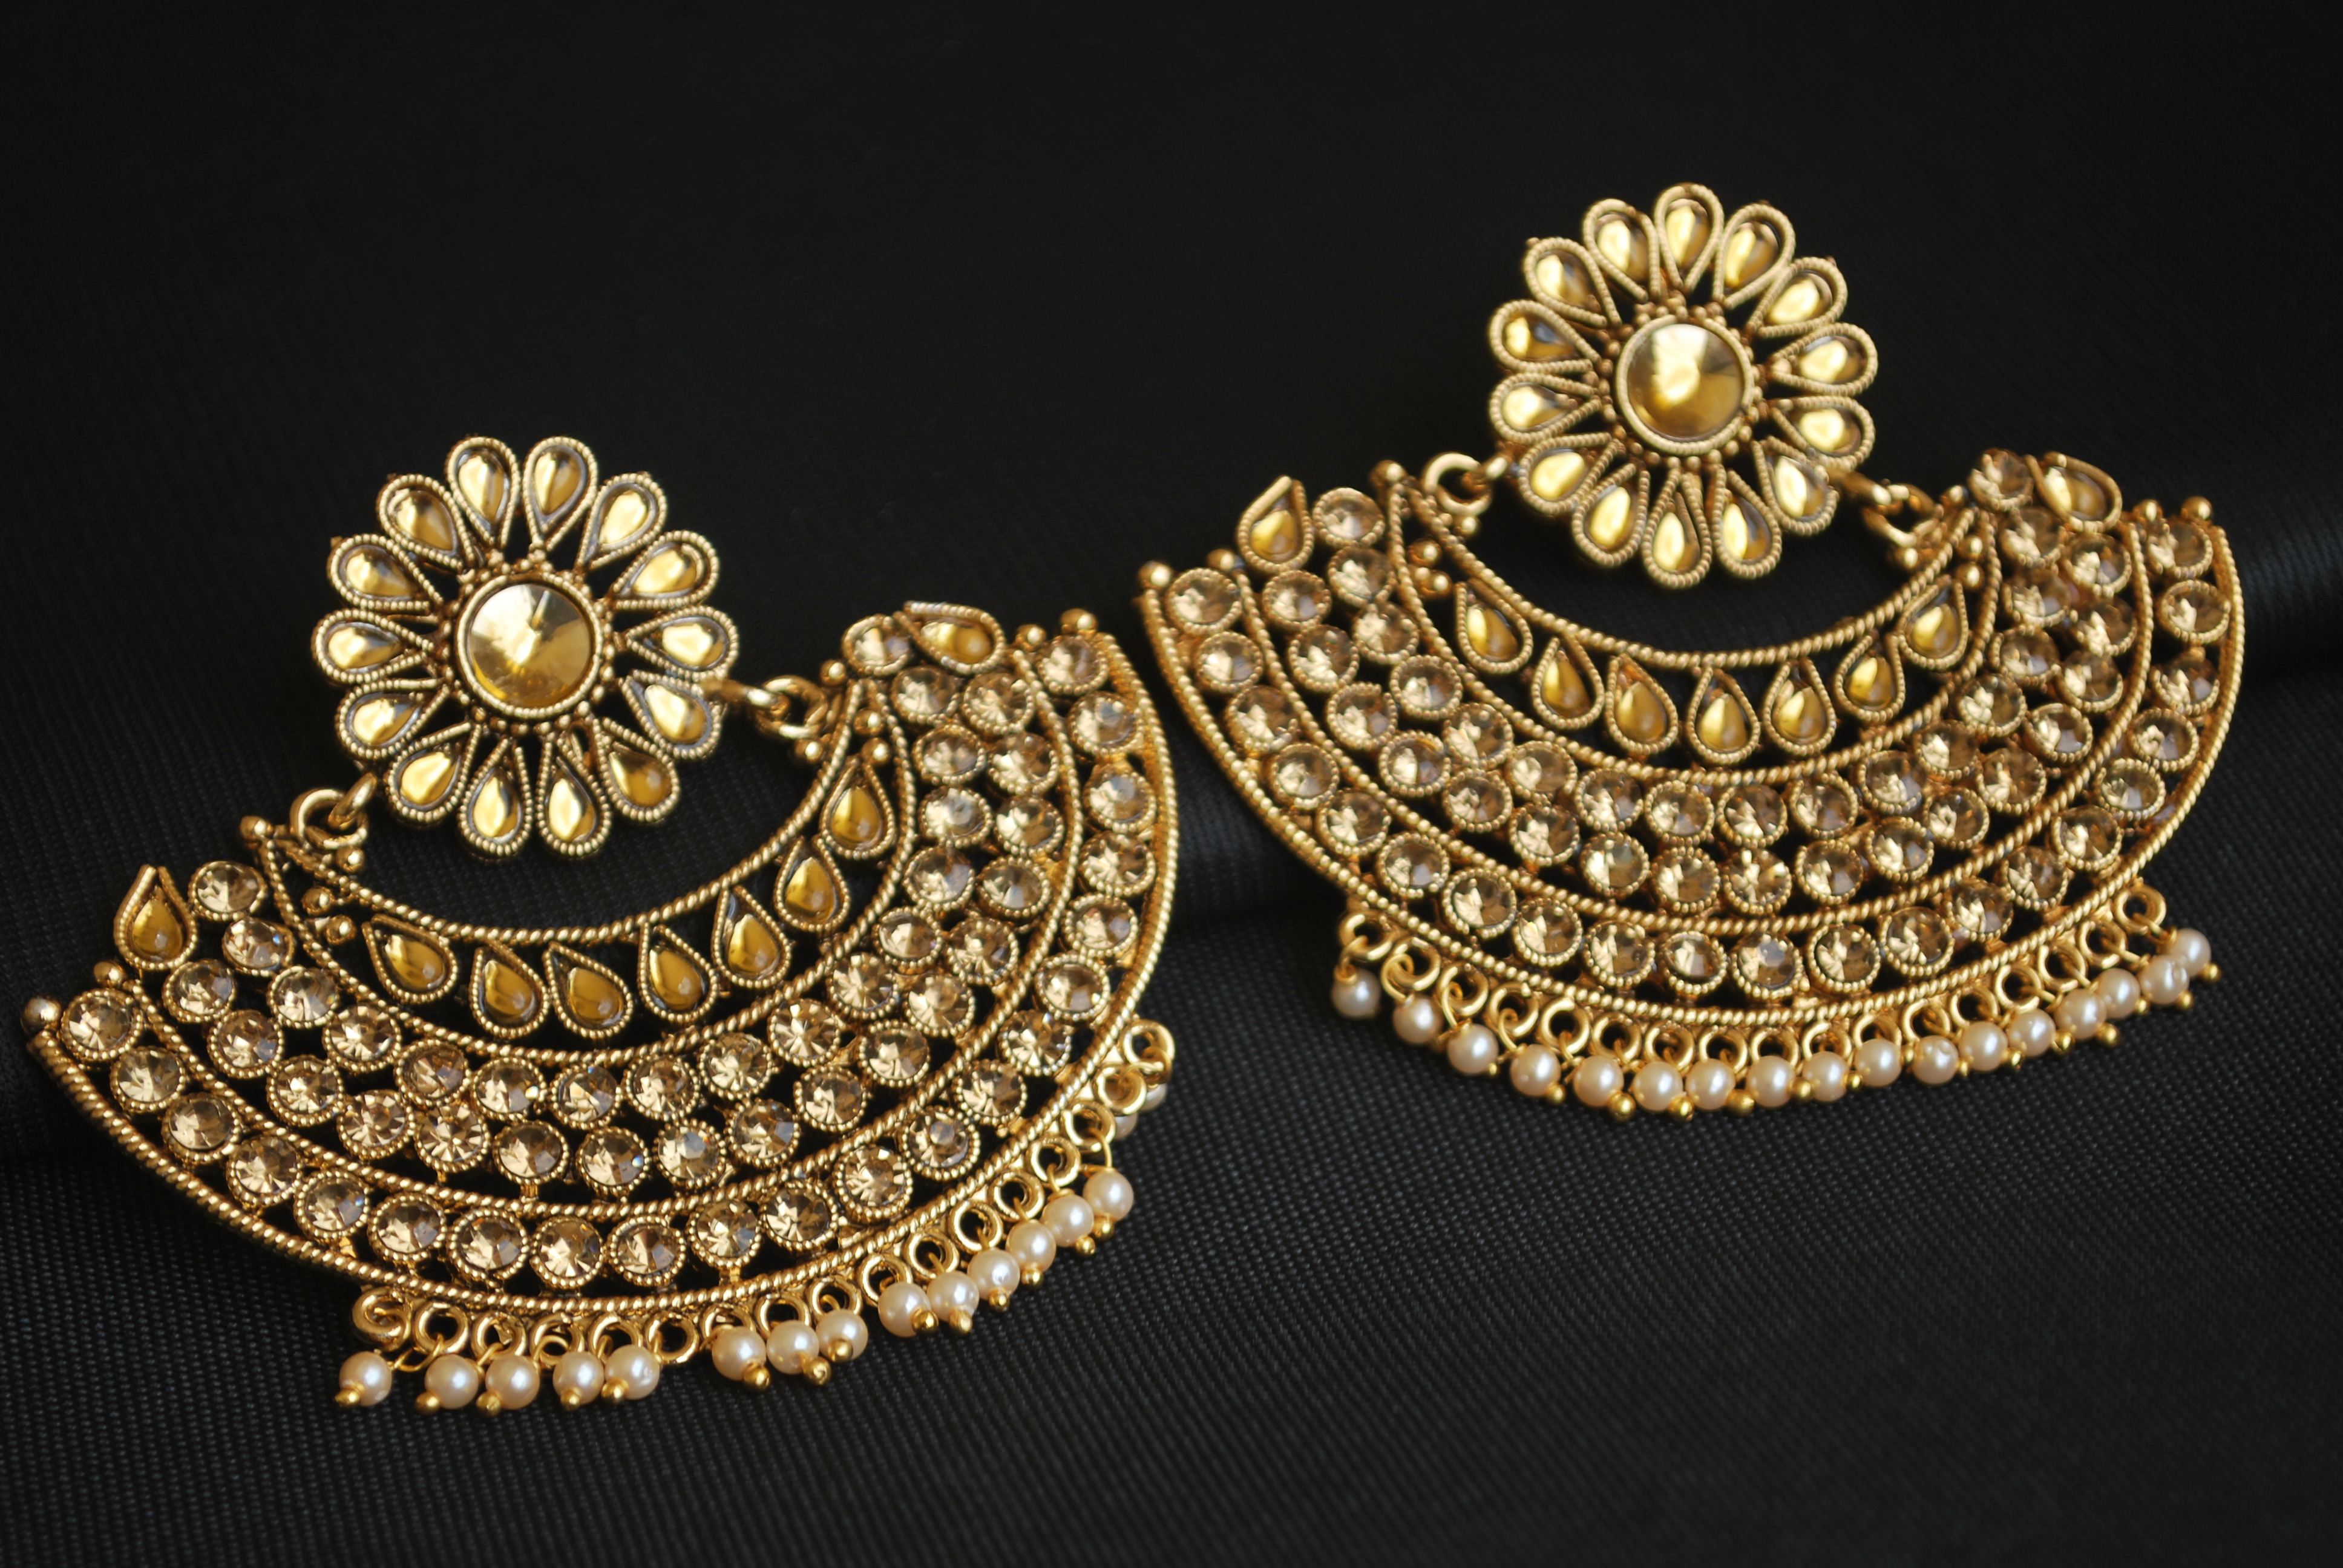 Gold Imitation Jewellery Earring in Chennai at best price by Isk Covering   Justdial